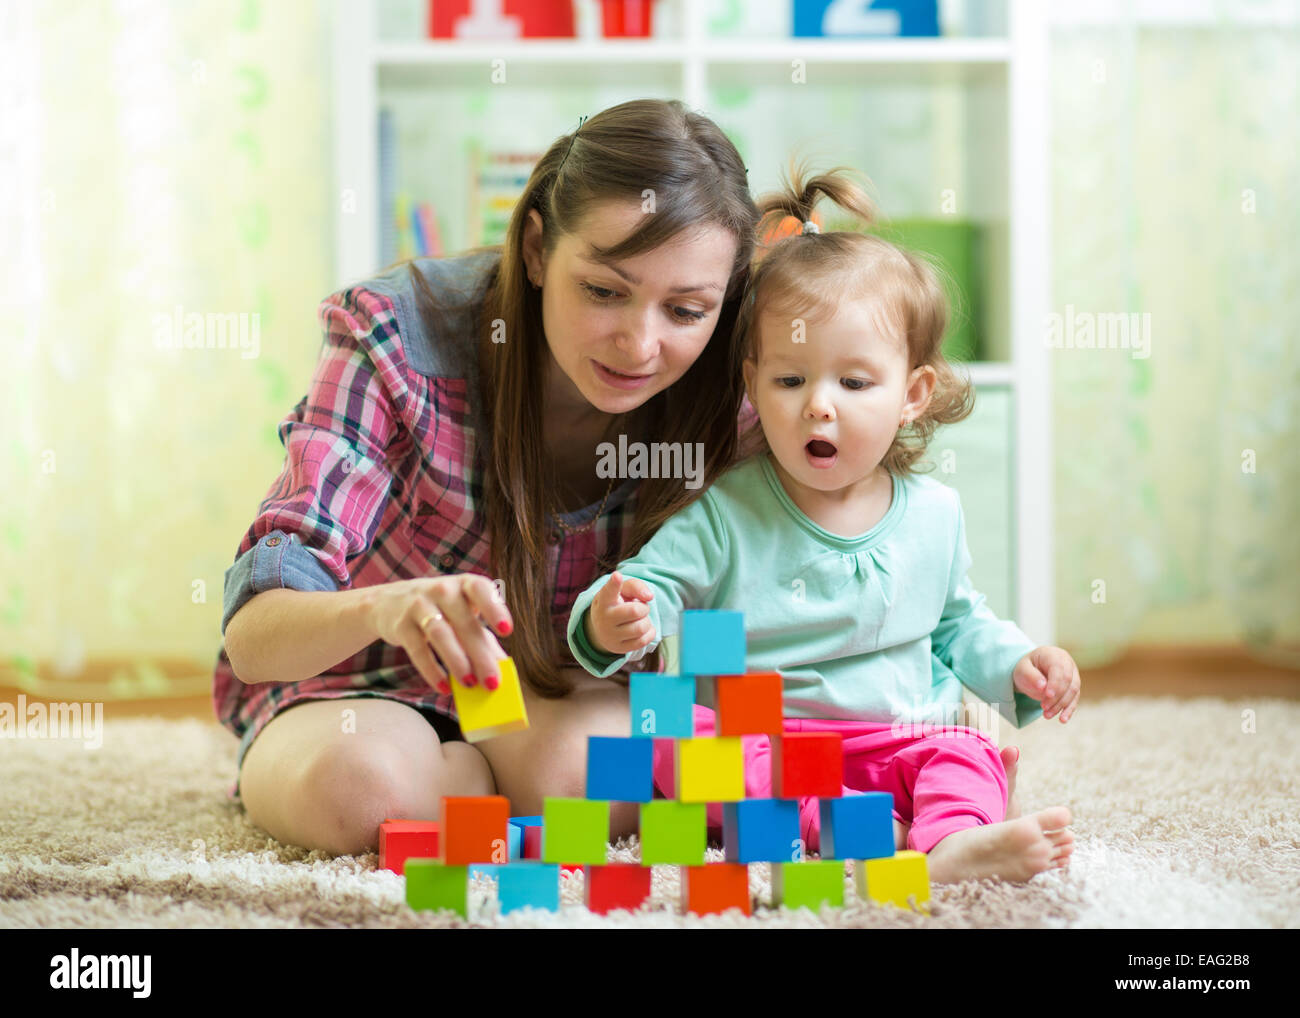 mom with her daughter play together Stock Photo